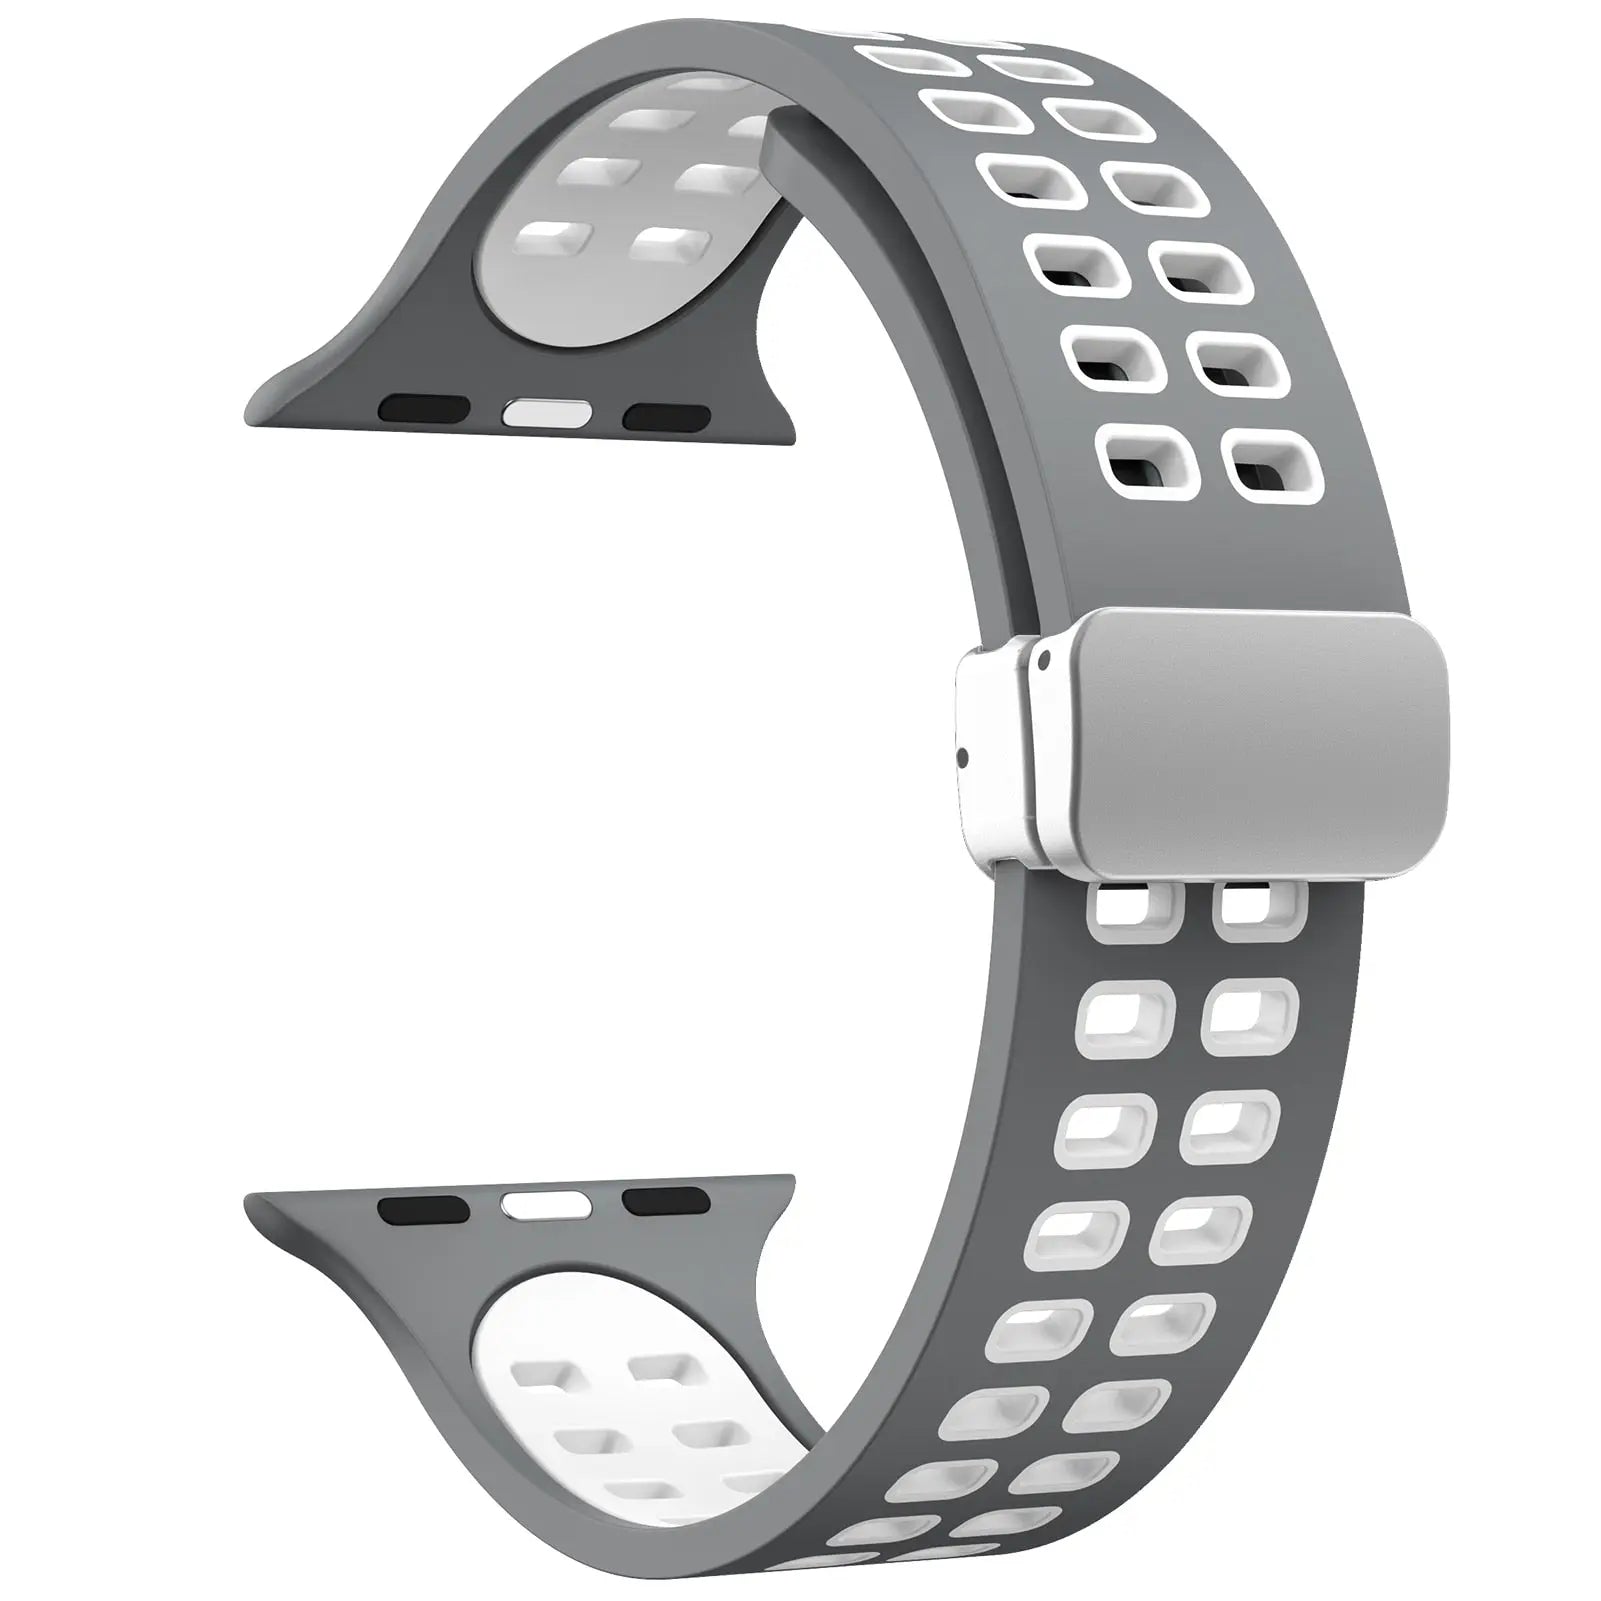 MagSport Silicone Band: Magnetic Metal Buckle Sport Band for Apple Watch - Pinnacle Luxuries